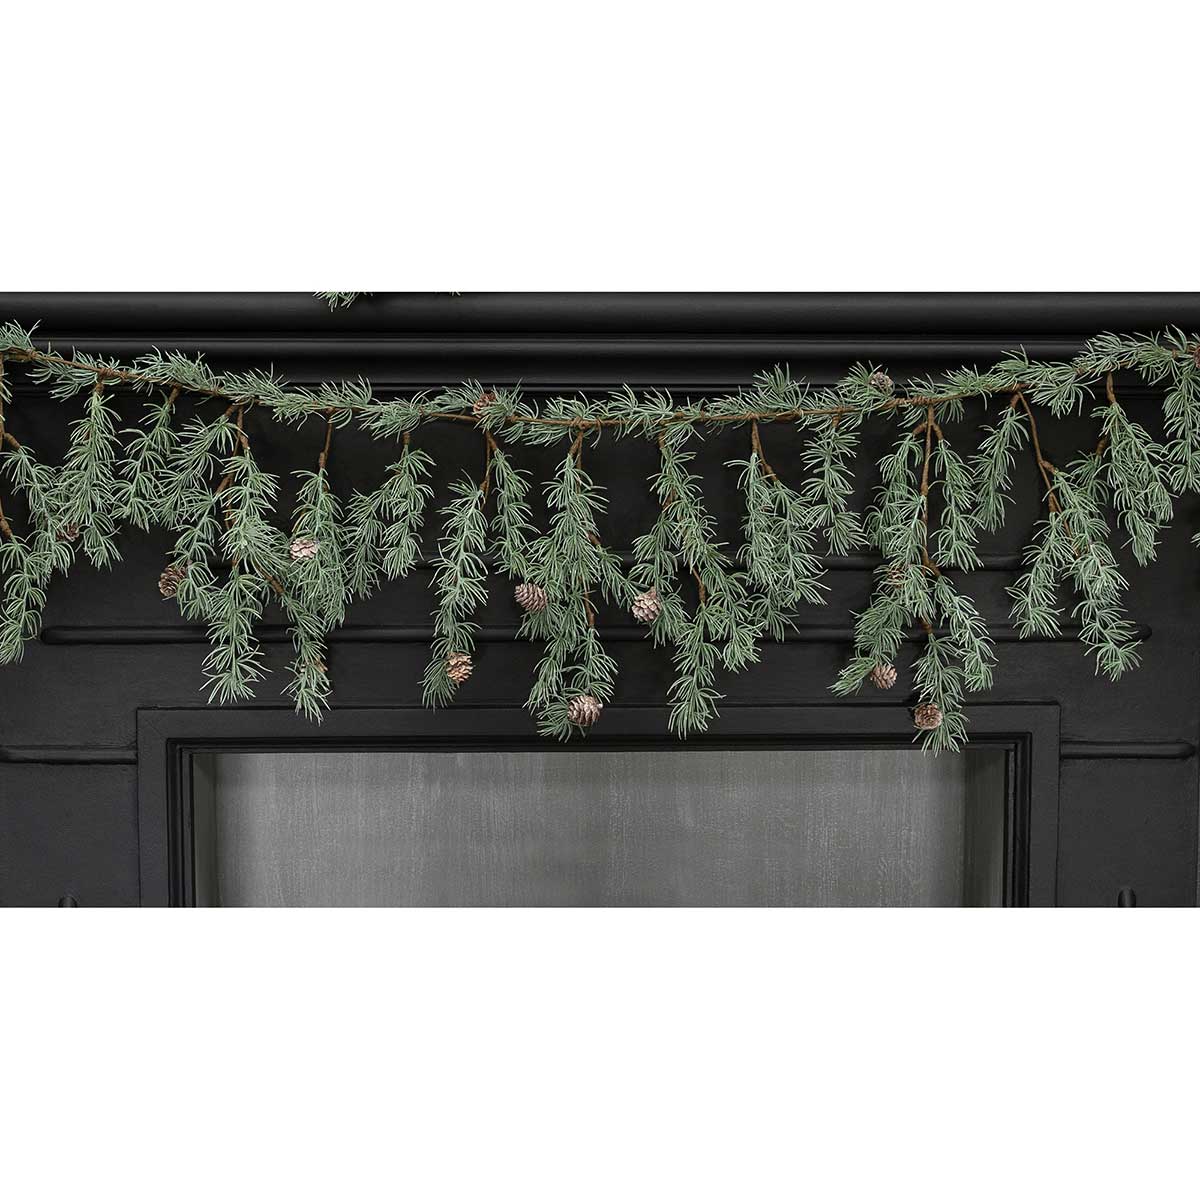 WEEPING PINE GARLAND WITH PINECONES 68"X16"